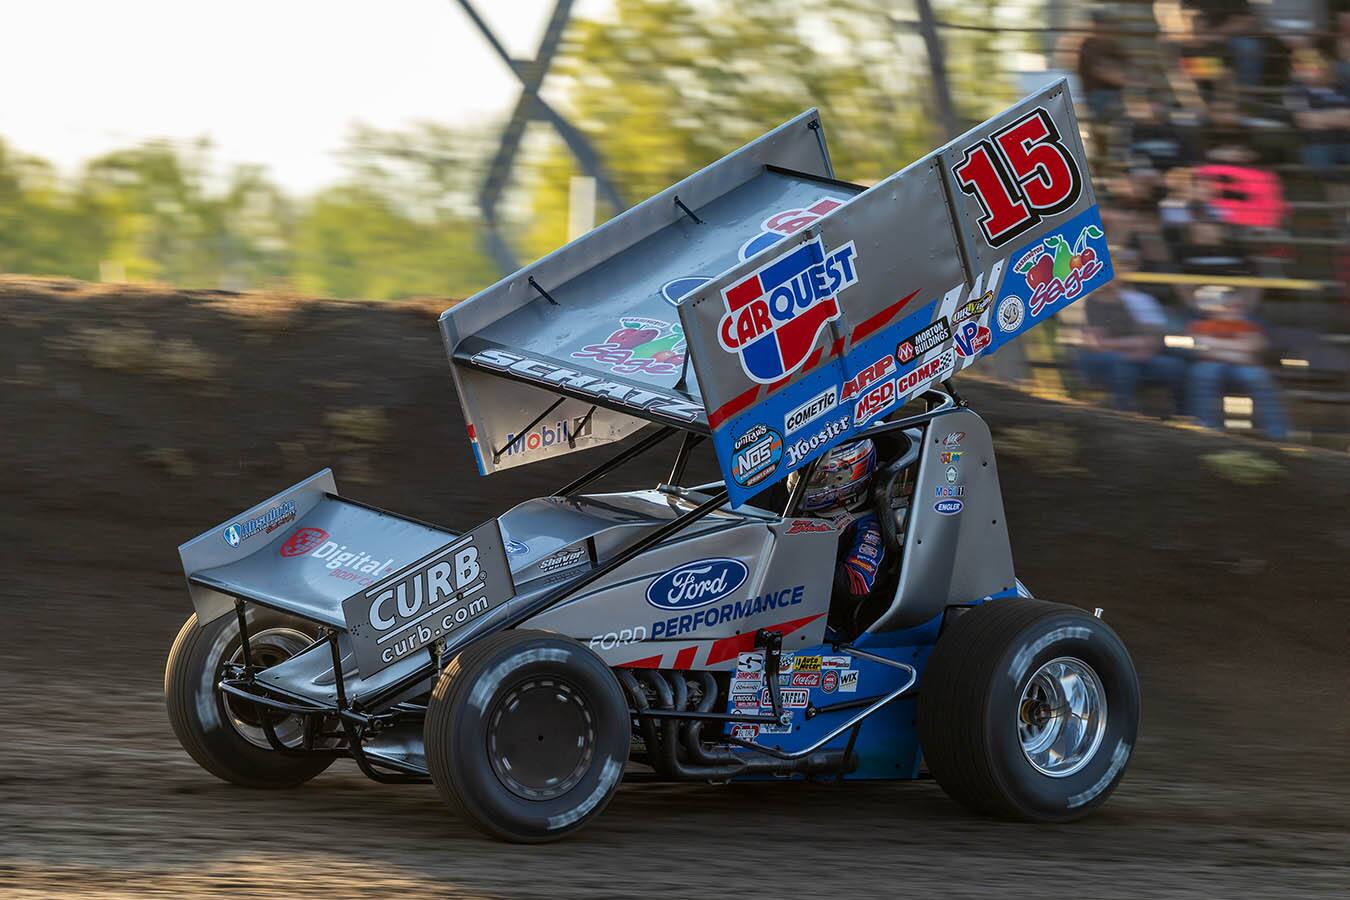 In World of Outlaws, Donny Schatz finished second on Thursday, 12th on Friday and fifth on Sunday.